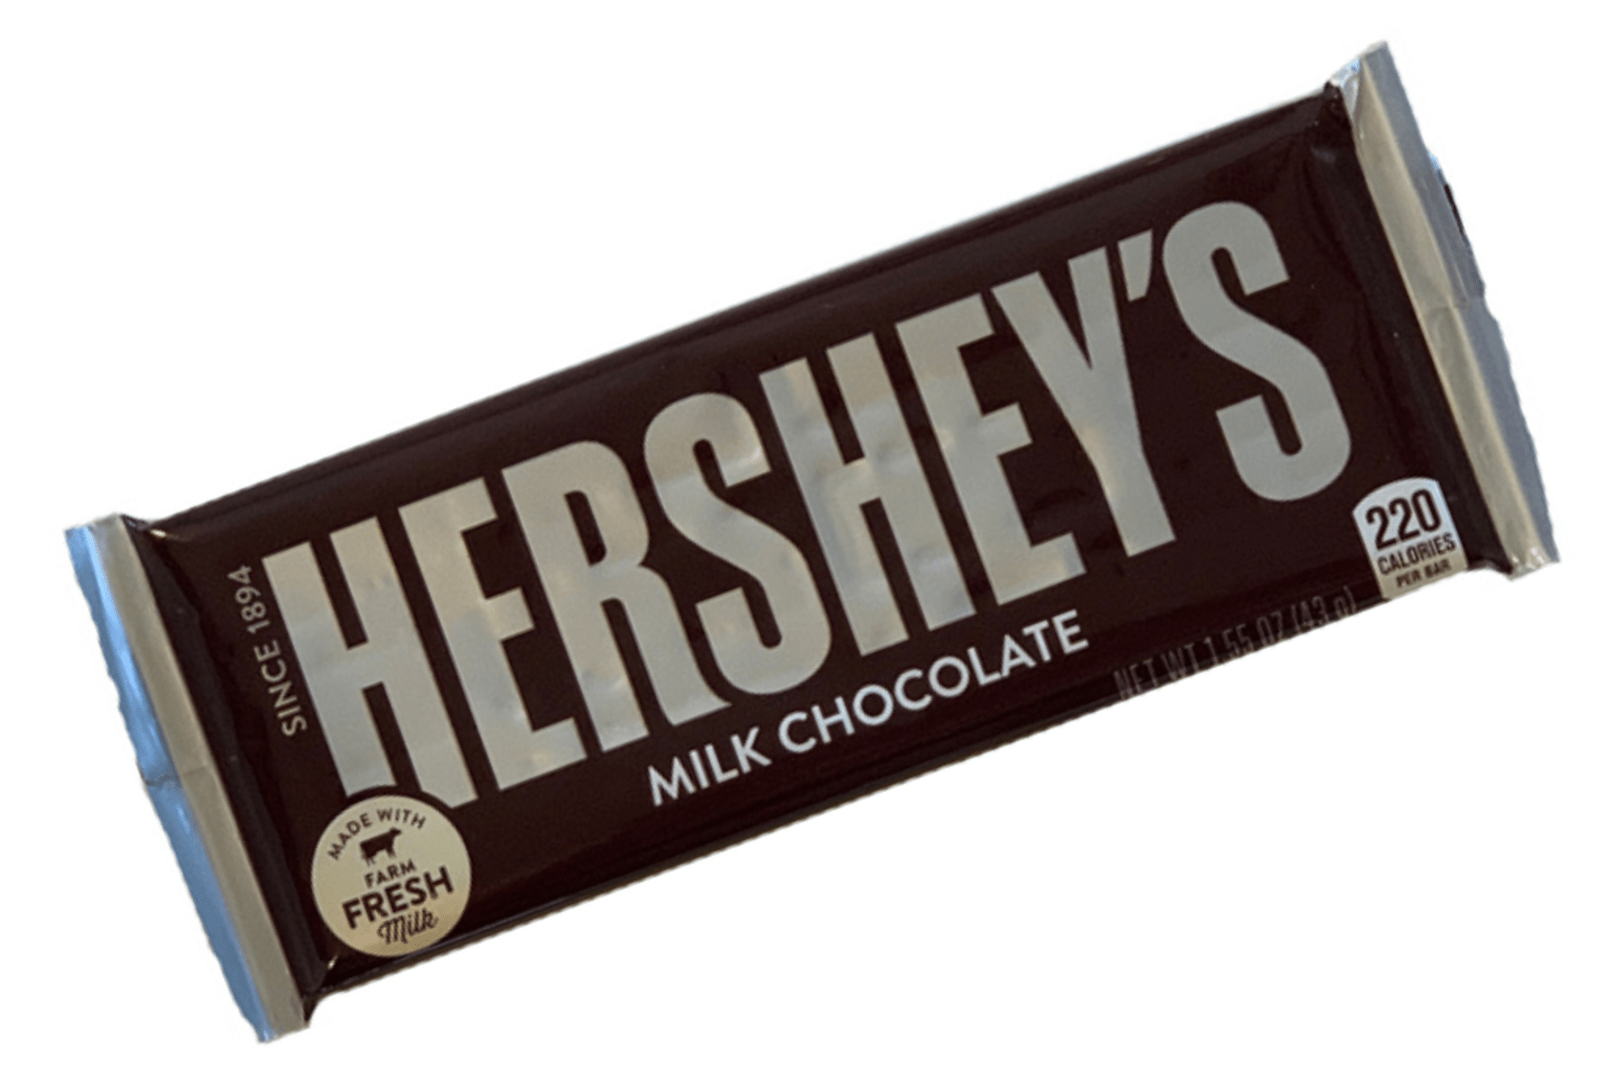 A Hershey's chocolate bar in its wrapper